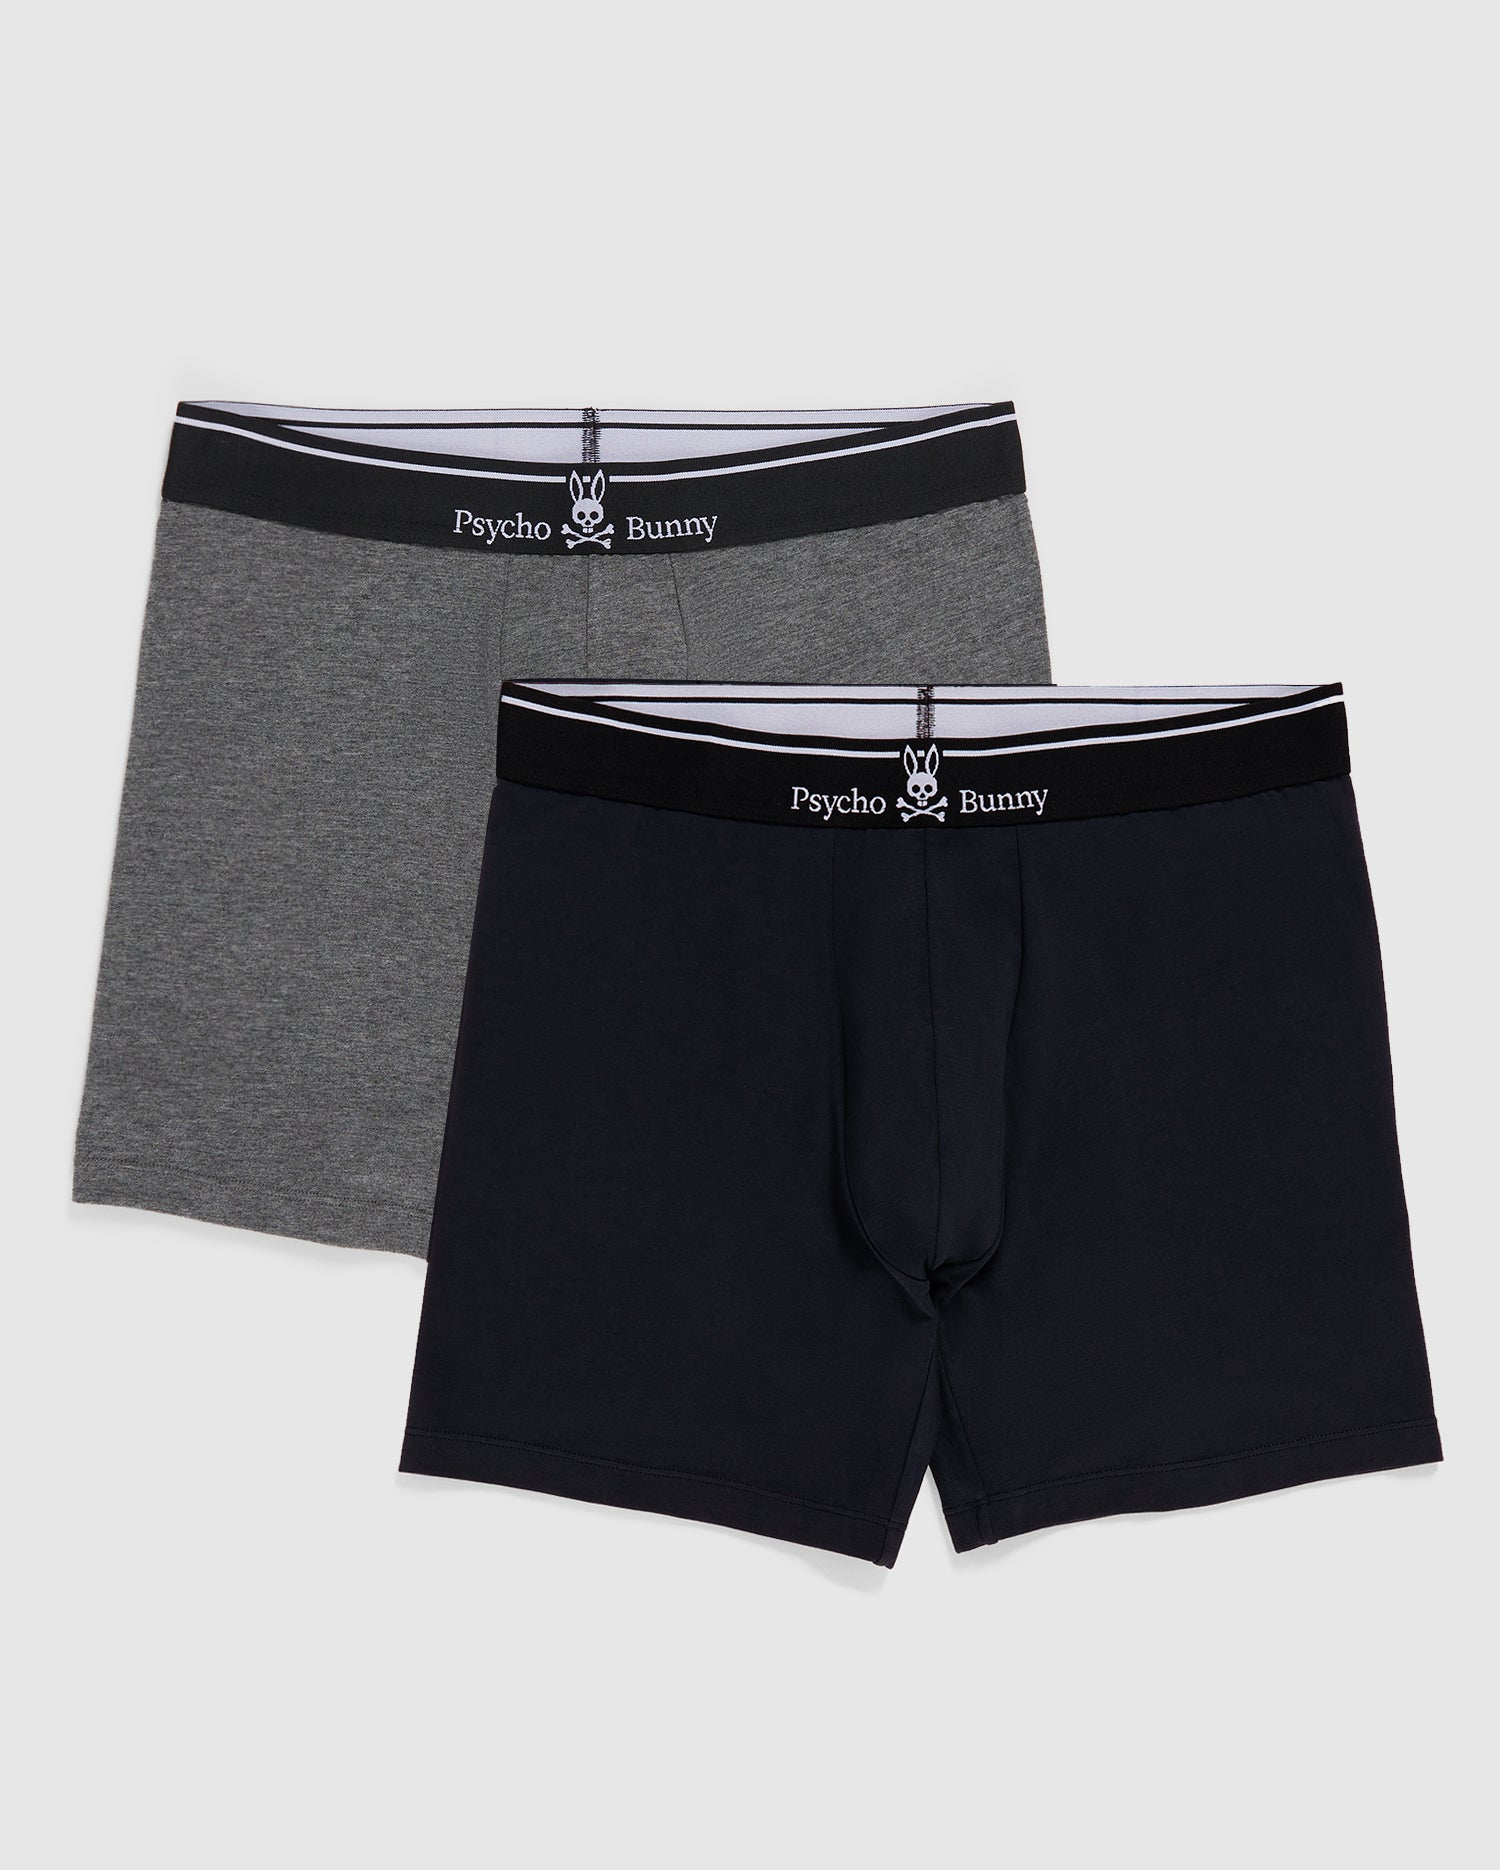 Buy Black & Green Briefs for Men by U.S. Polo Assn. Online